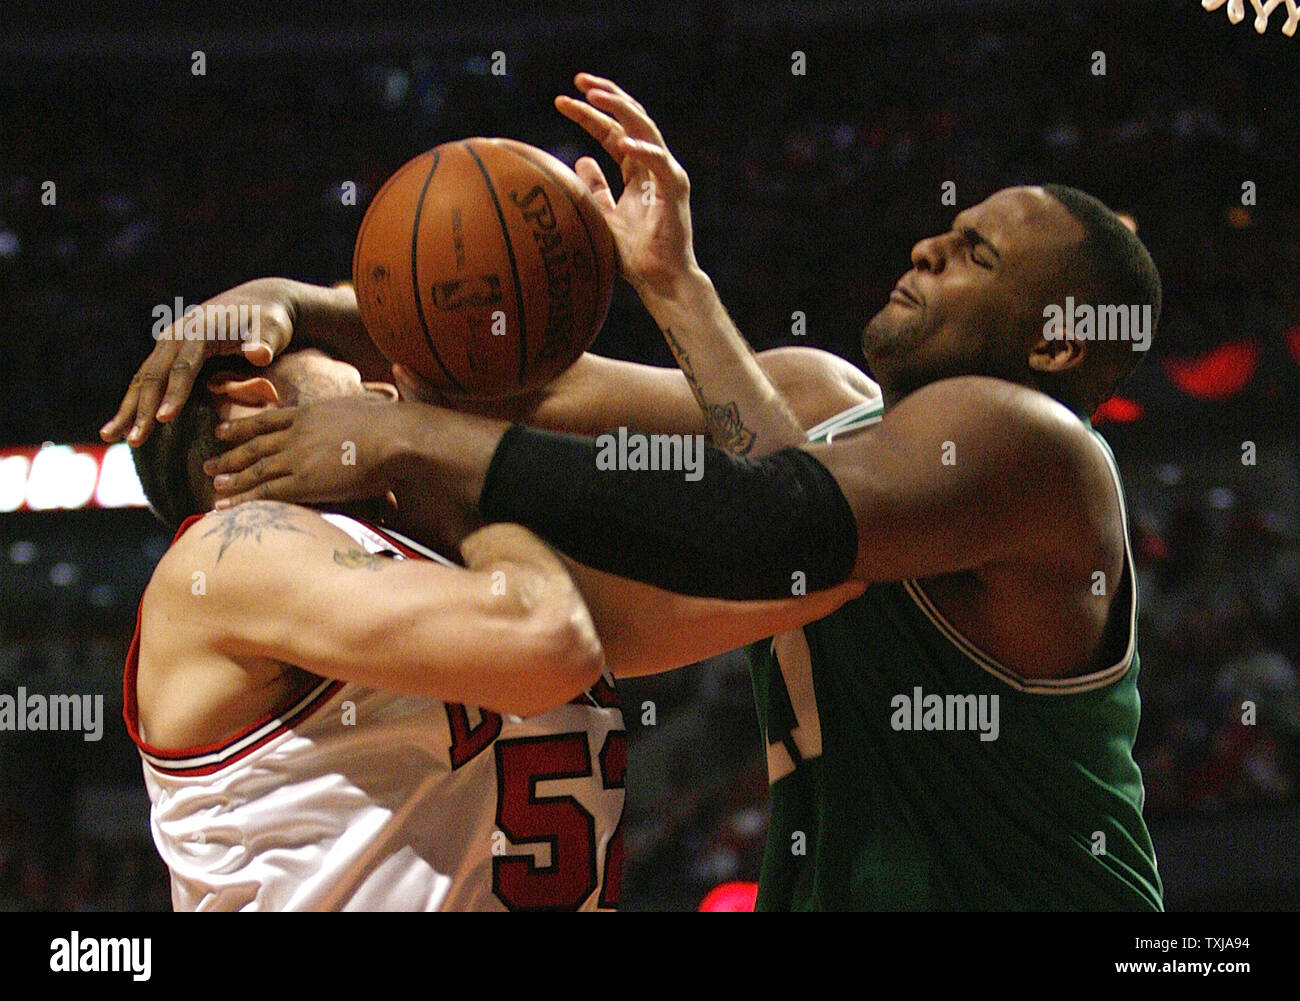 Boston Celtics' Glen Davis (R) fouls Chicago Bulls' Brad Miller as he goes  up for a shot during the fourth quarter of game 4 of their NBA Eastern  Conference Quarterfinal at the